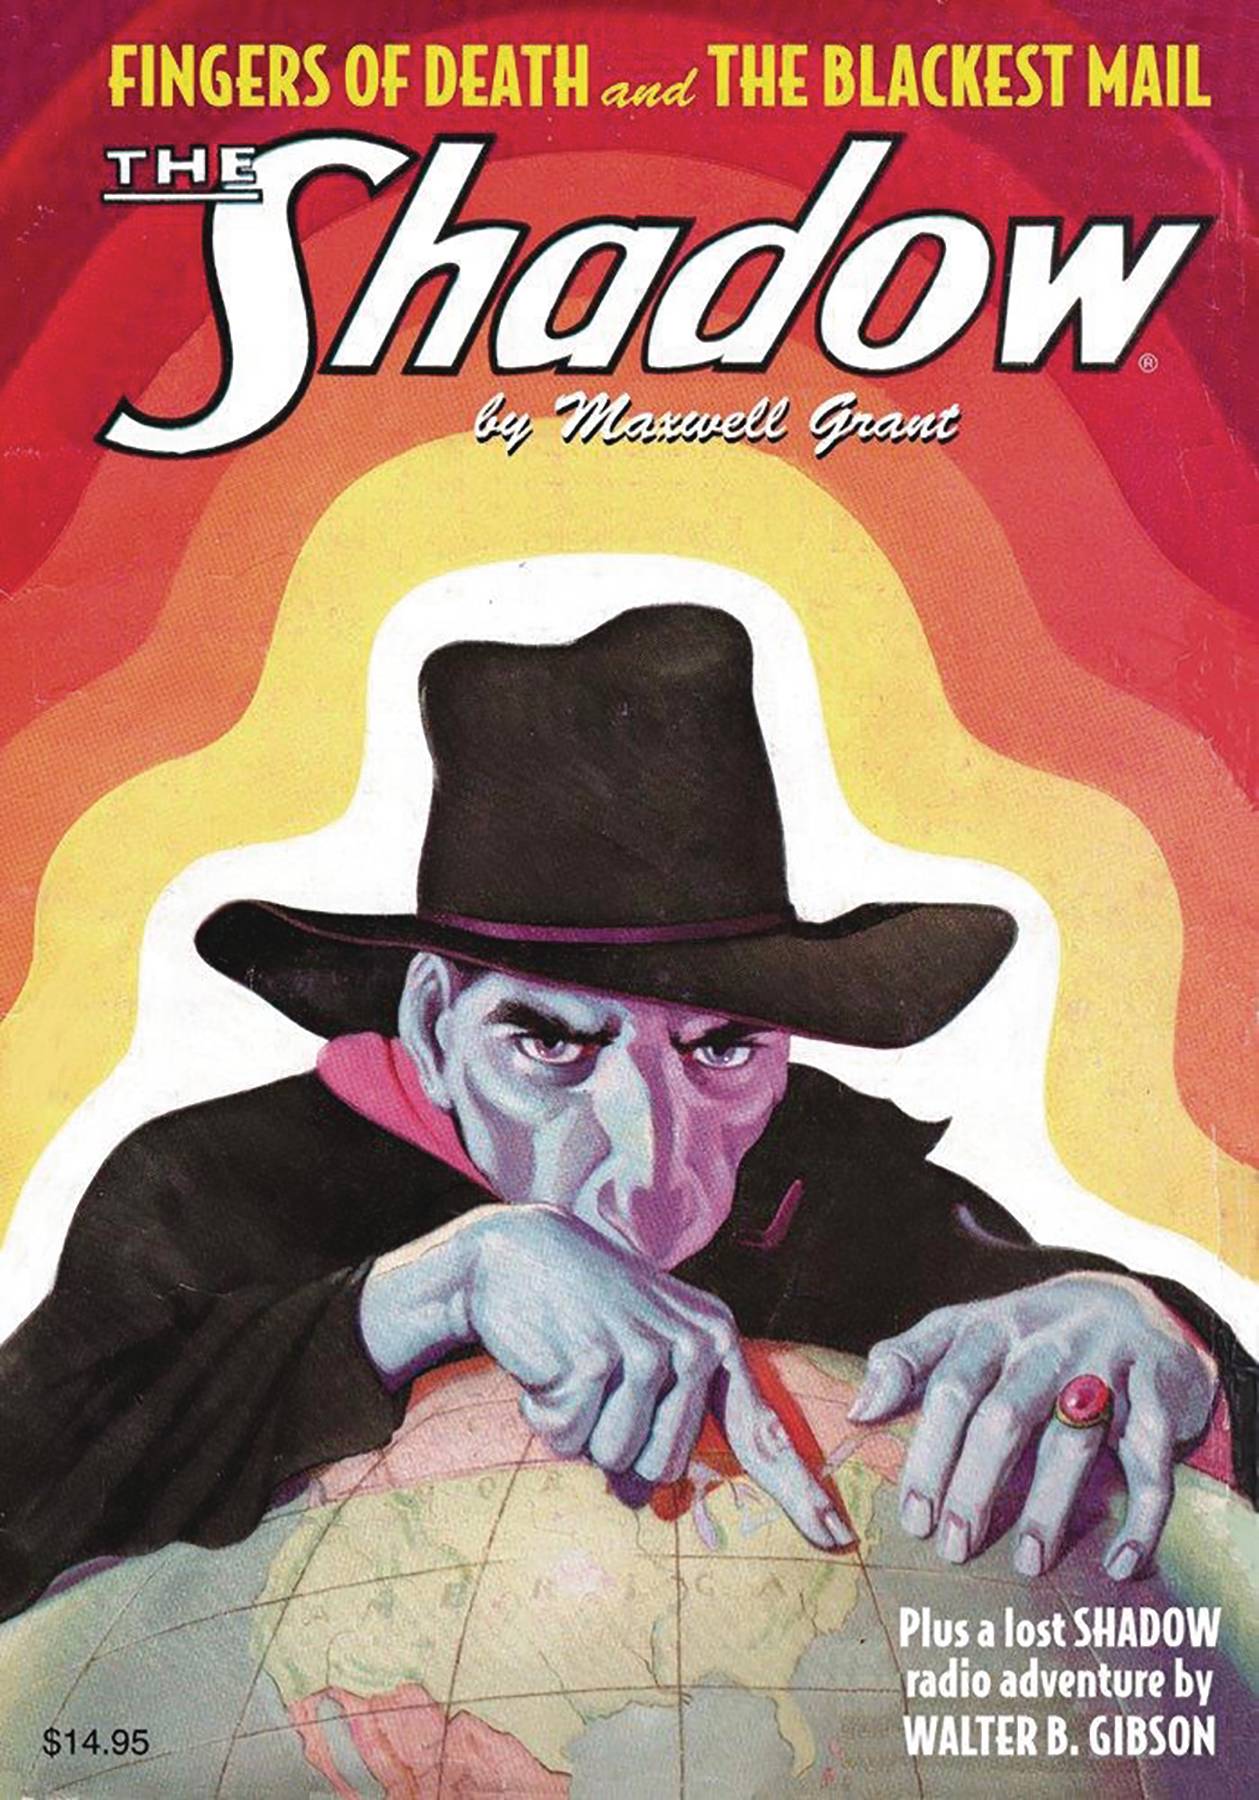 Shadow Double Novel Volume 132 Fingers of Death & Blackiest Mail